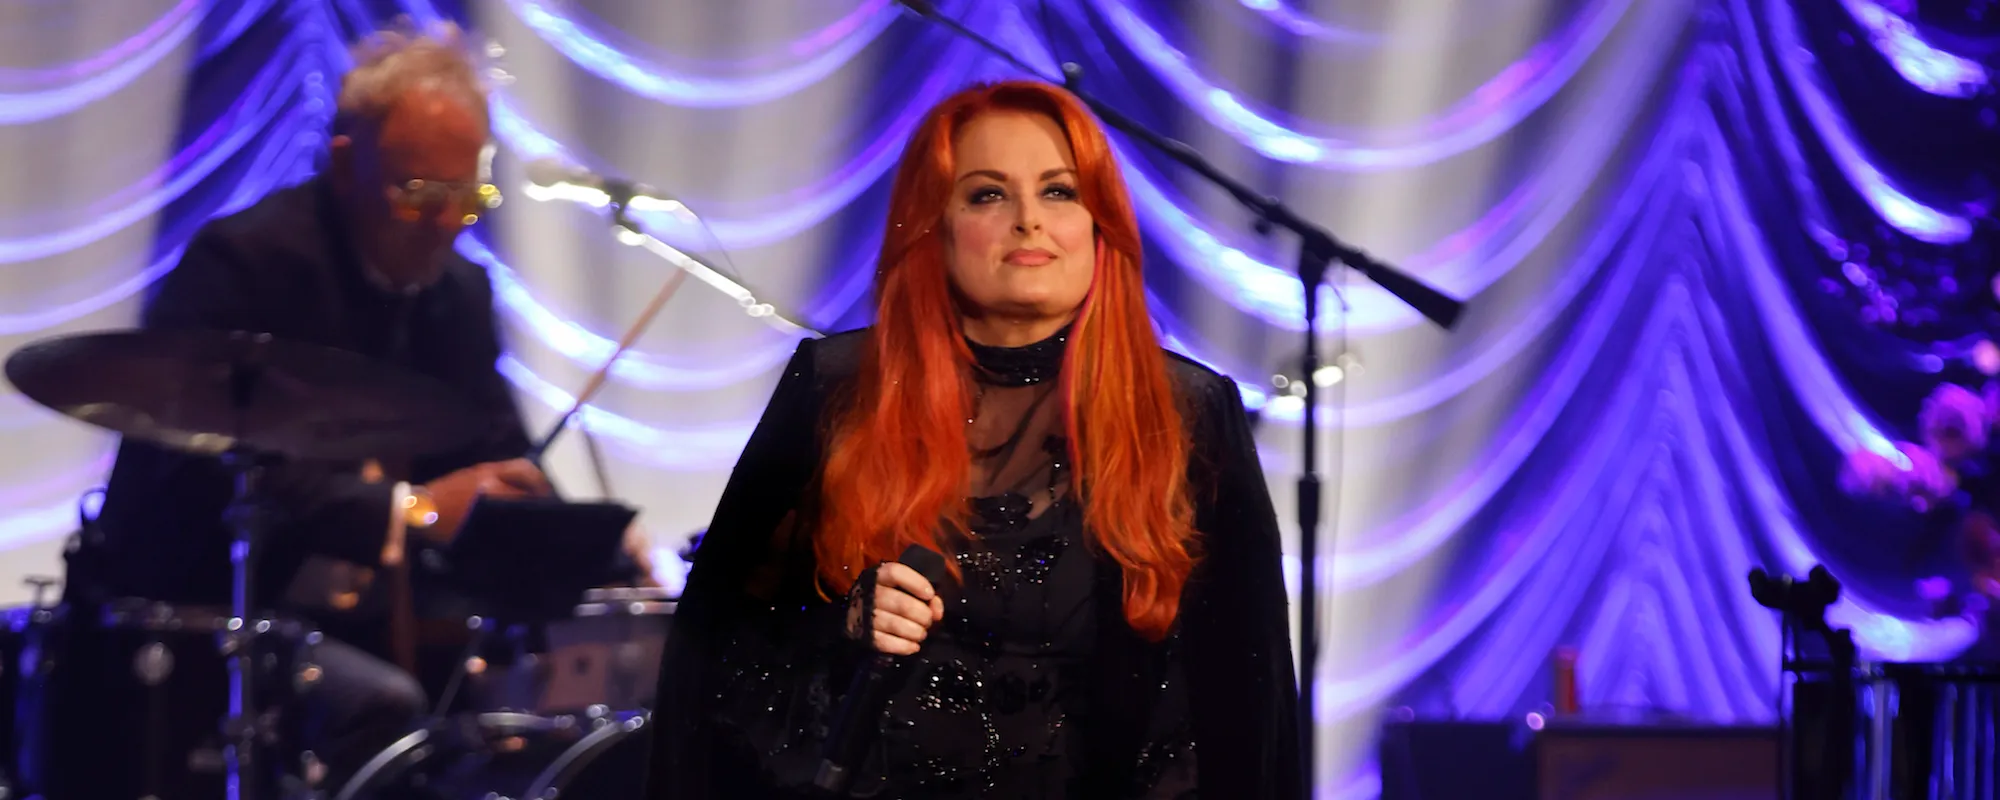 Wynonna Judd Concludes The Judds Final Tour with Tribute to Mother Naomi Judd—“It’s Done, Mama”